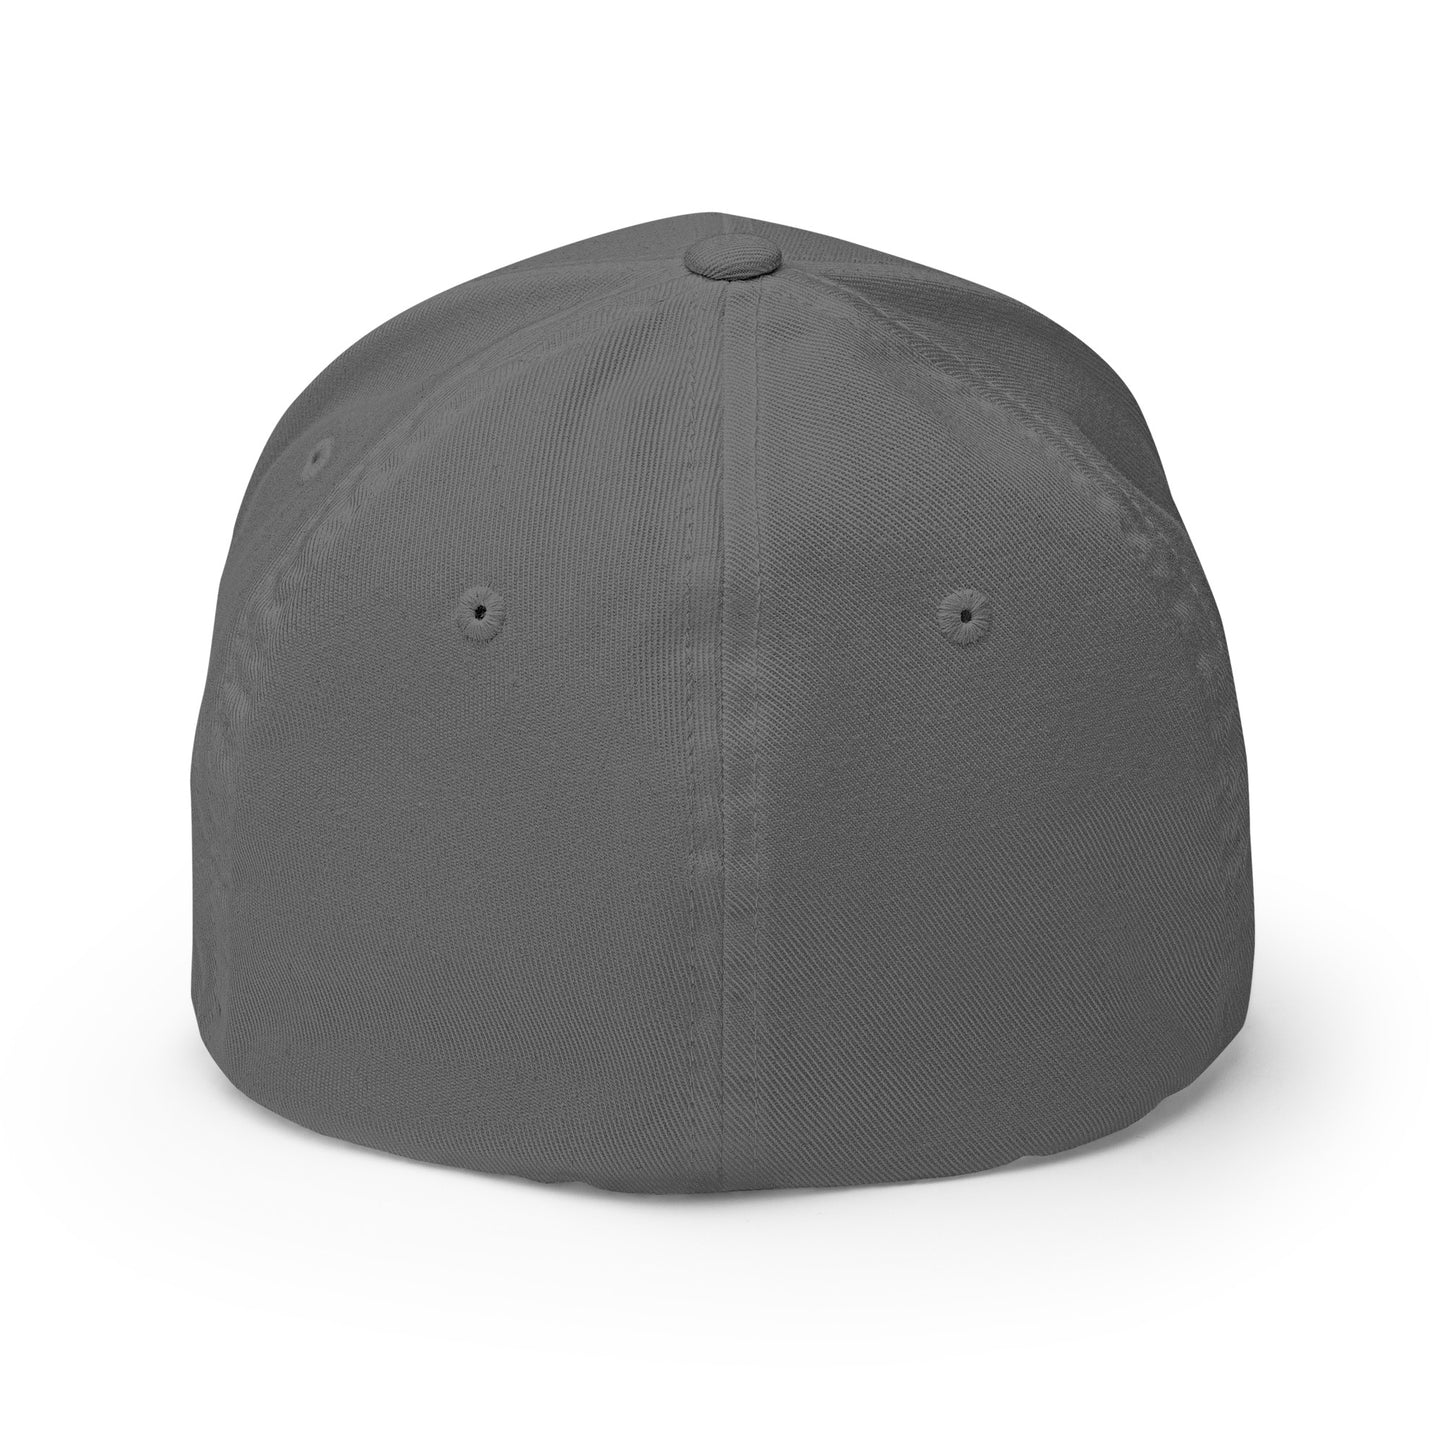 Baseball Cap with Number 1 One Symbol